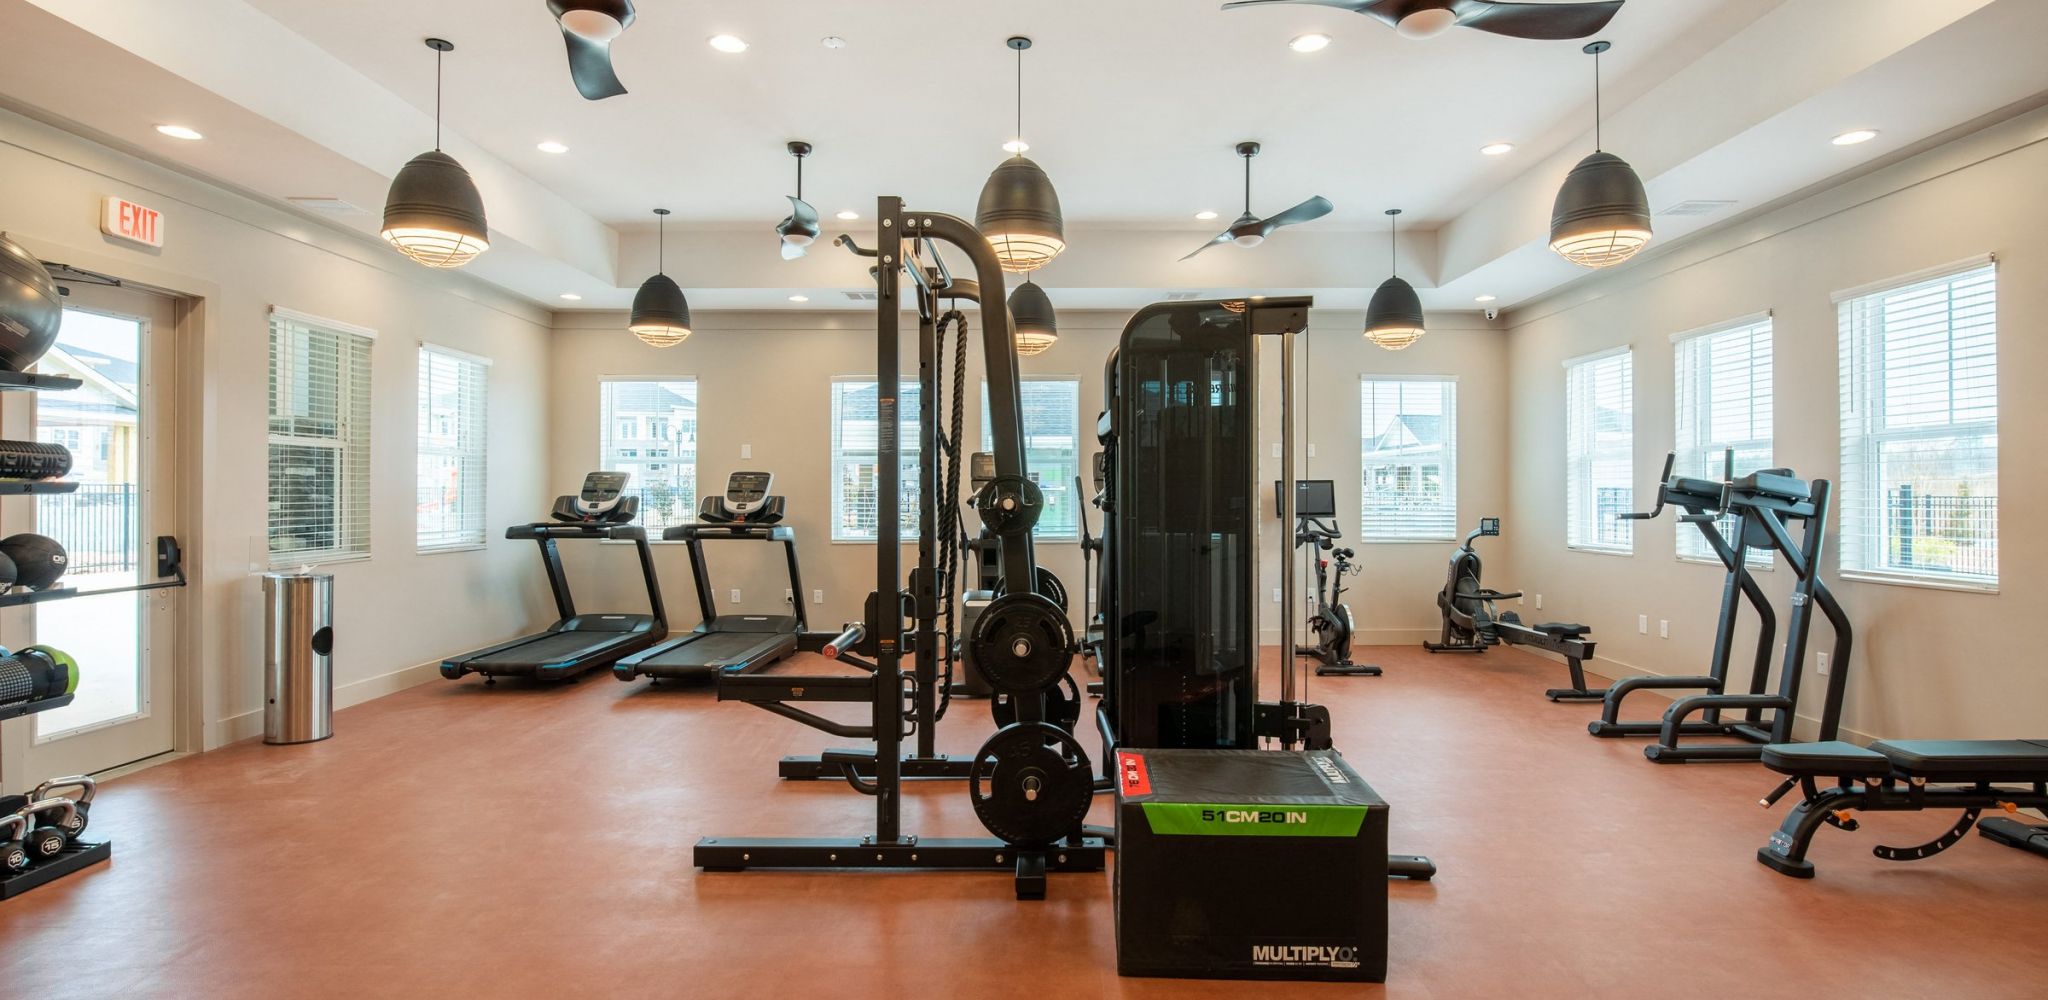 Hawthorne at the Crest apartments fitness studio with training equipment and cardio machines